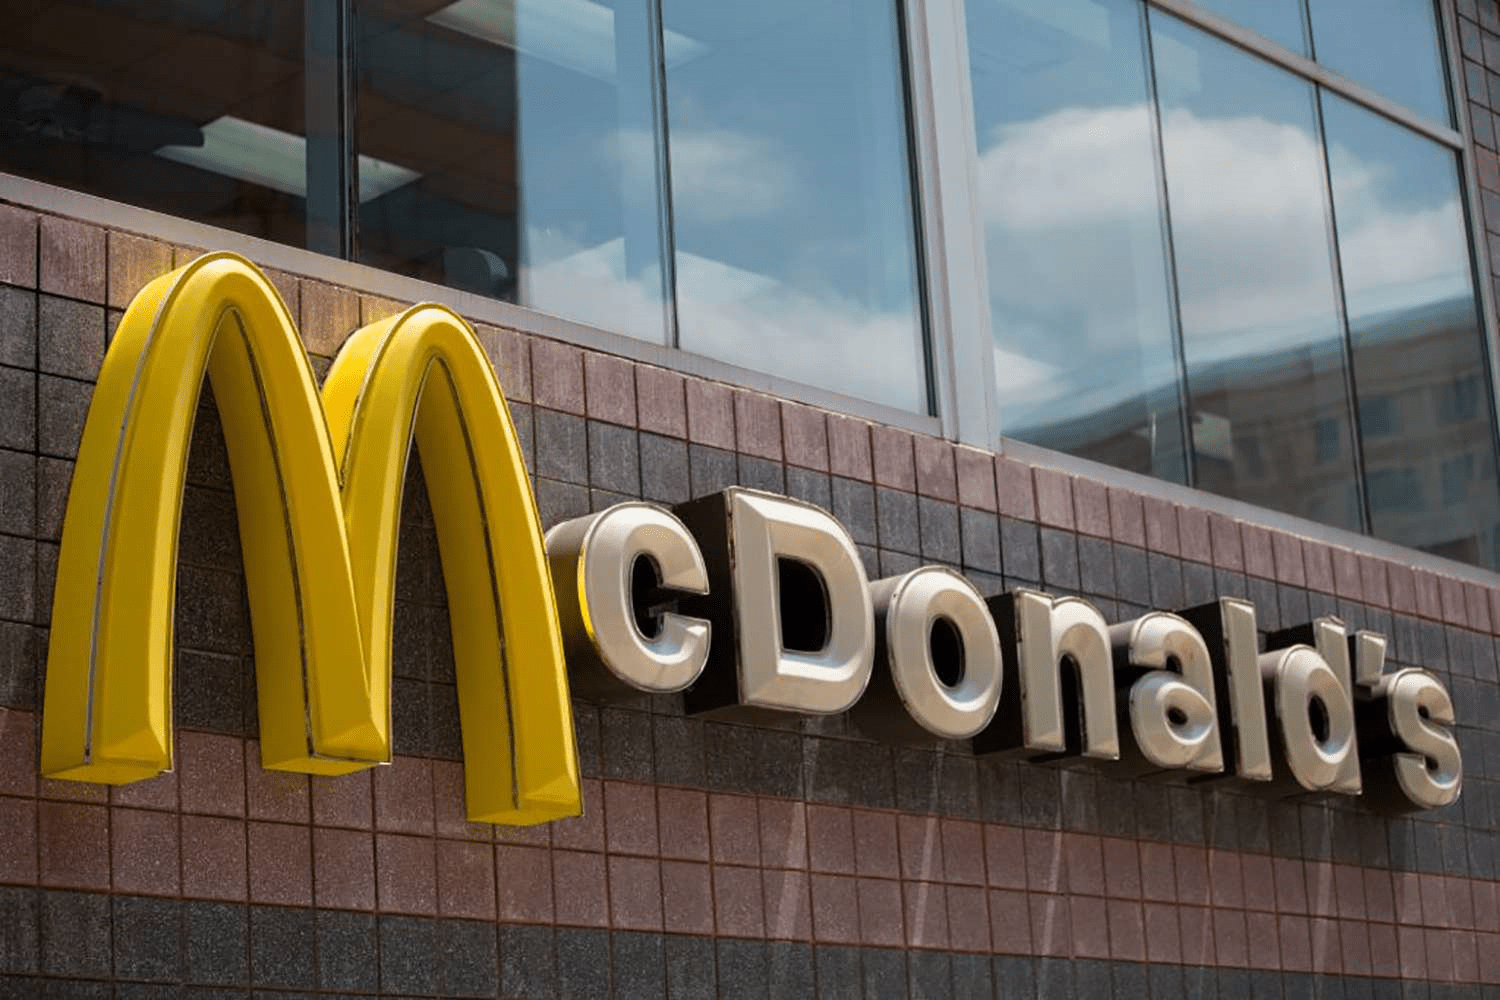 McDonalds franchisee fight regarding the tech fees could wind up in court